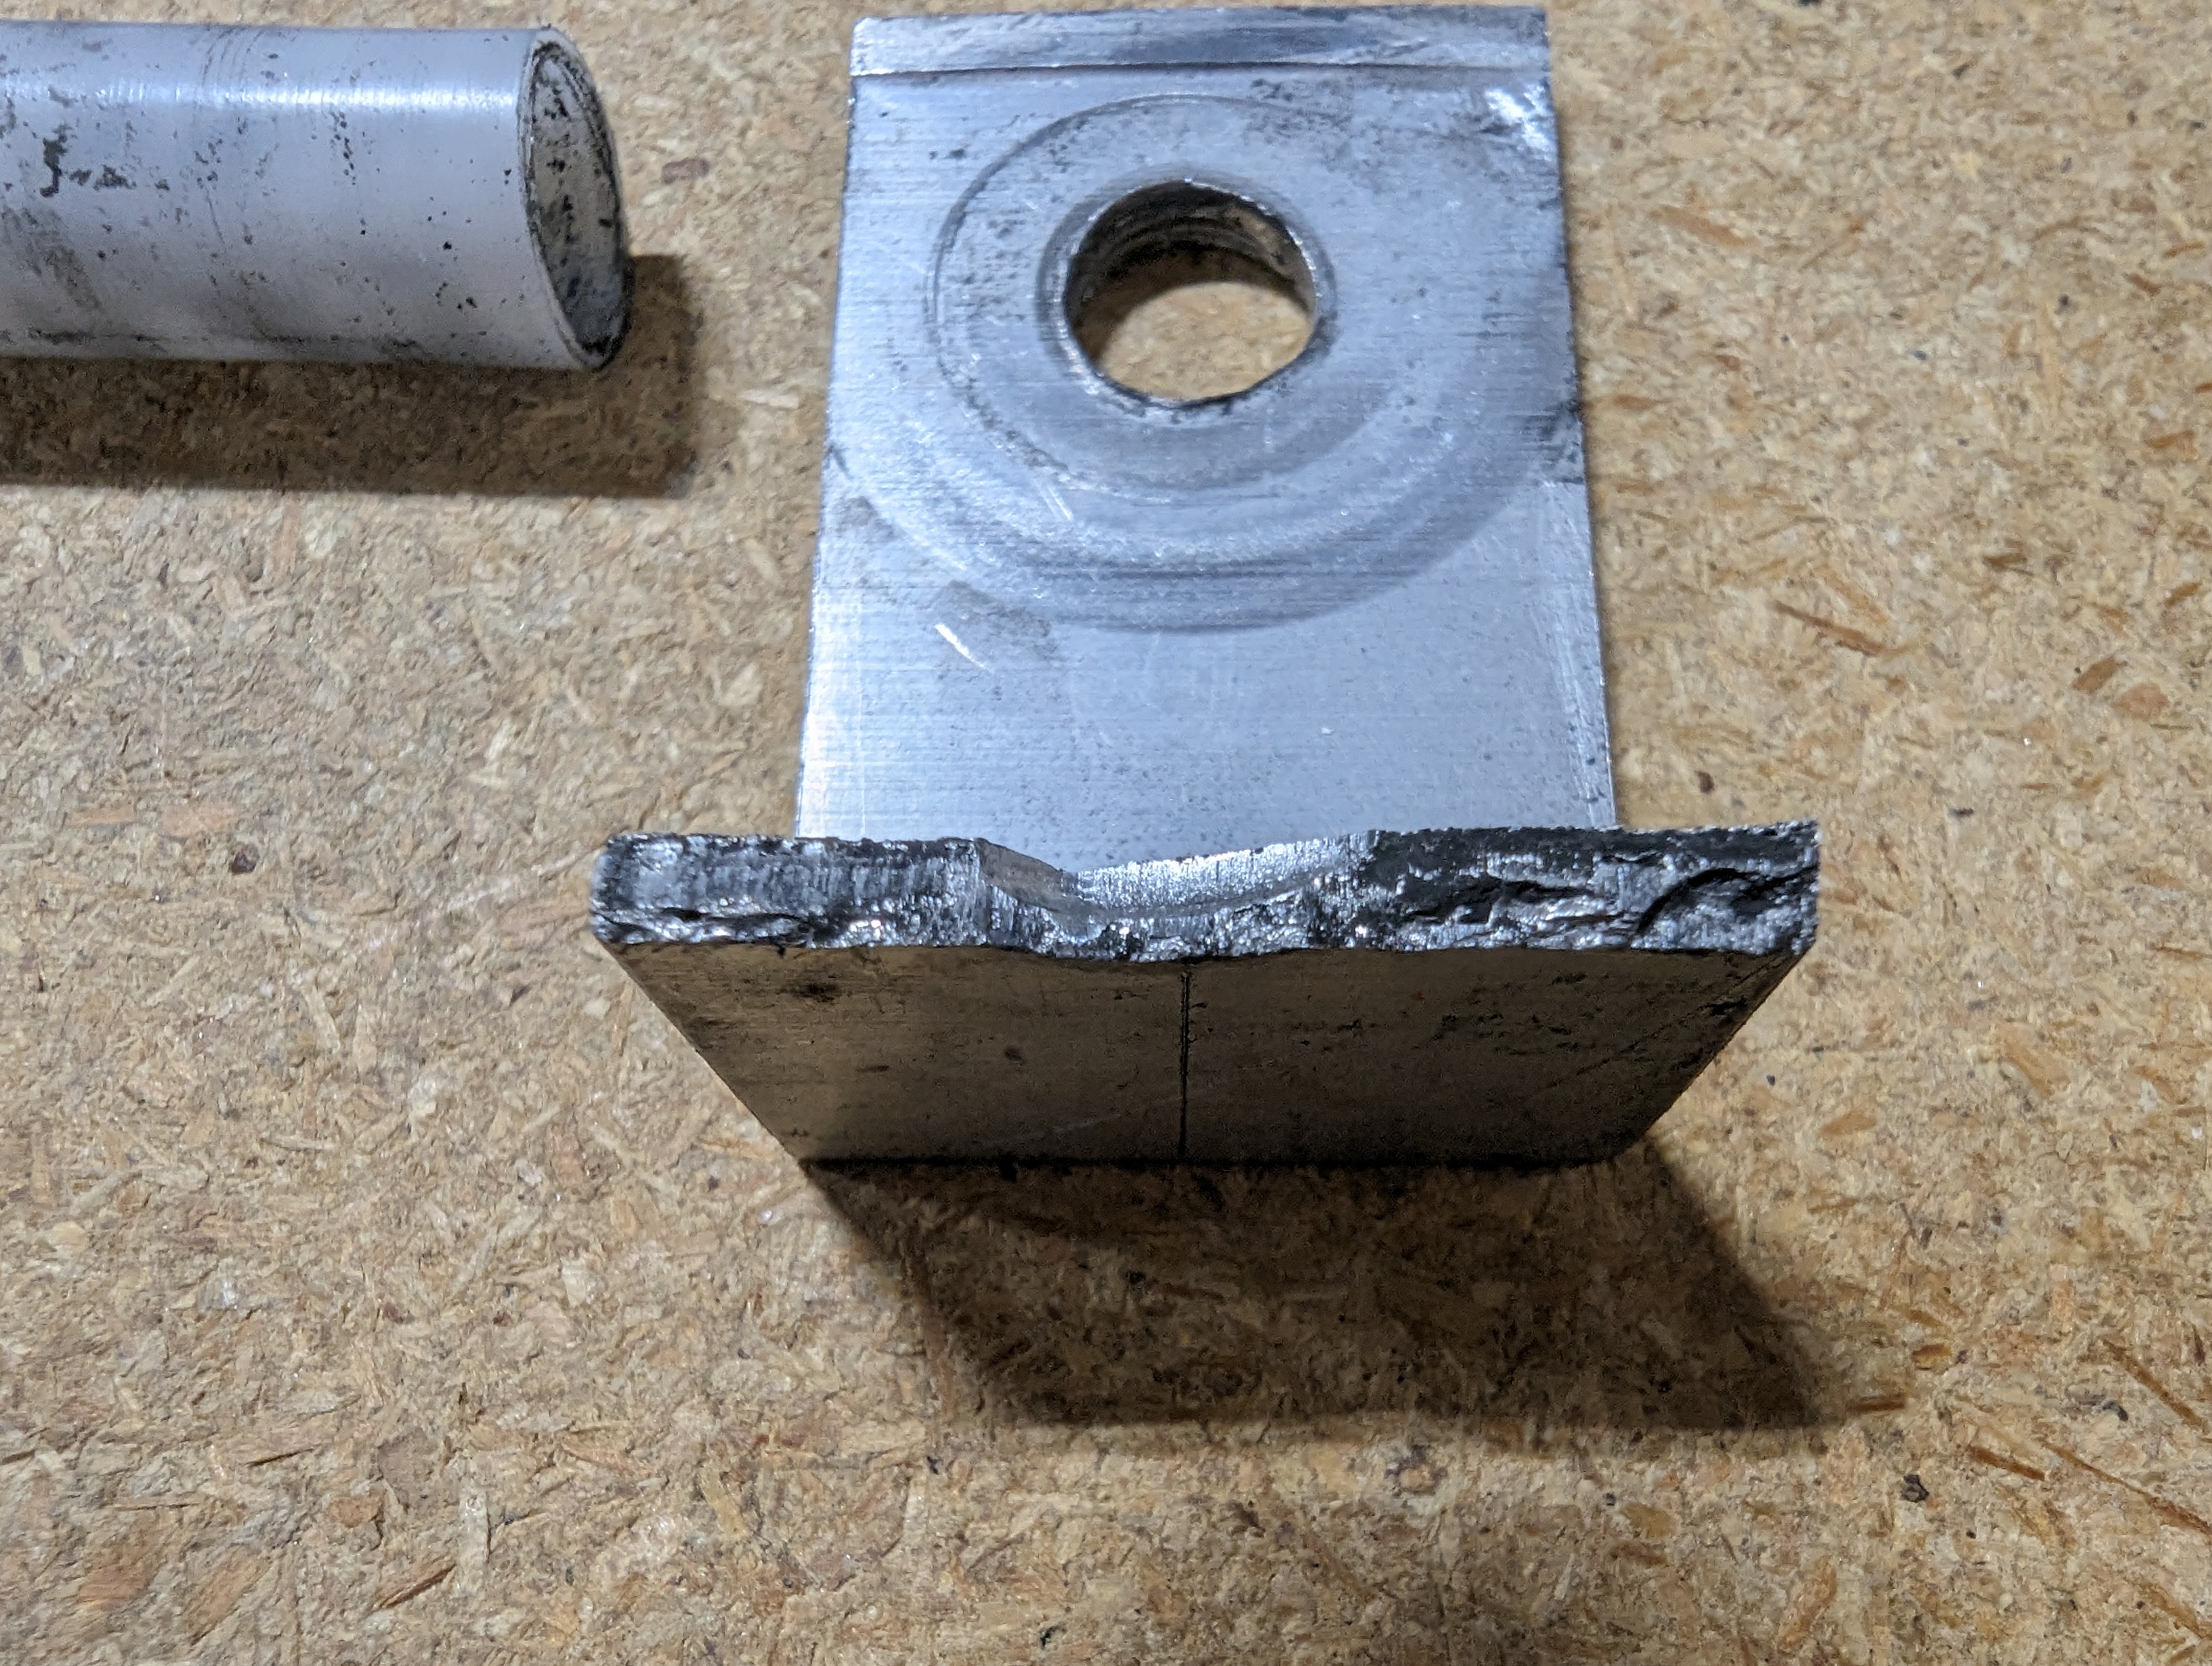 one of the fracture points in the bracket